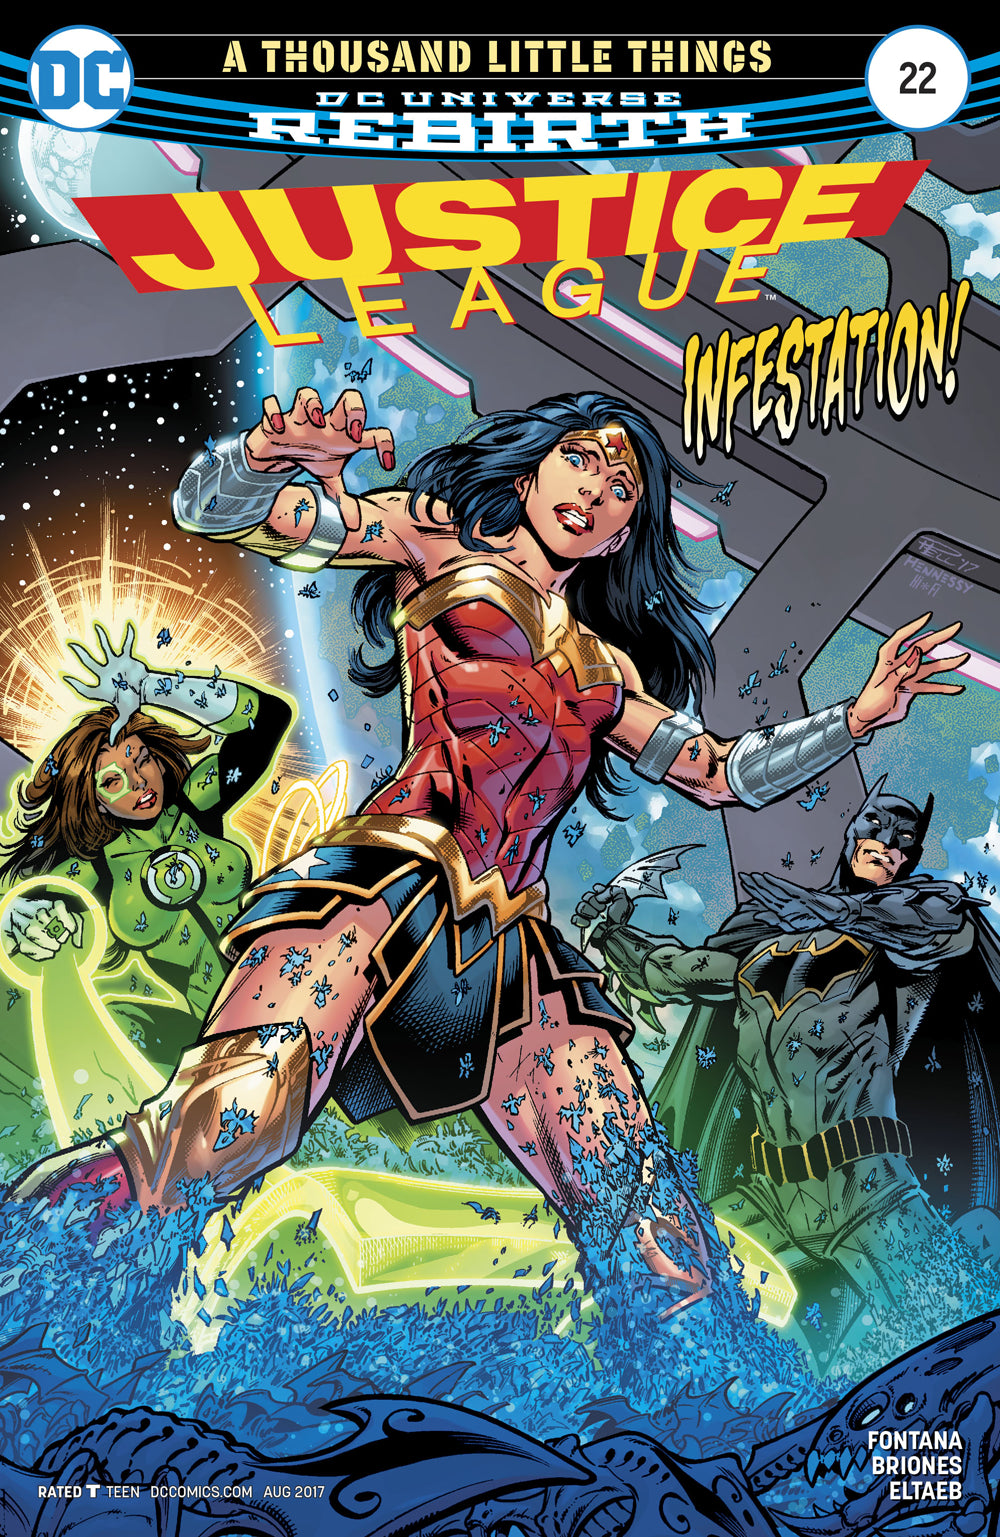 JUSTICE LEAGUE #22 | Game Master's Emporium (The New GME)